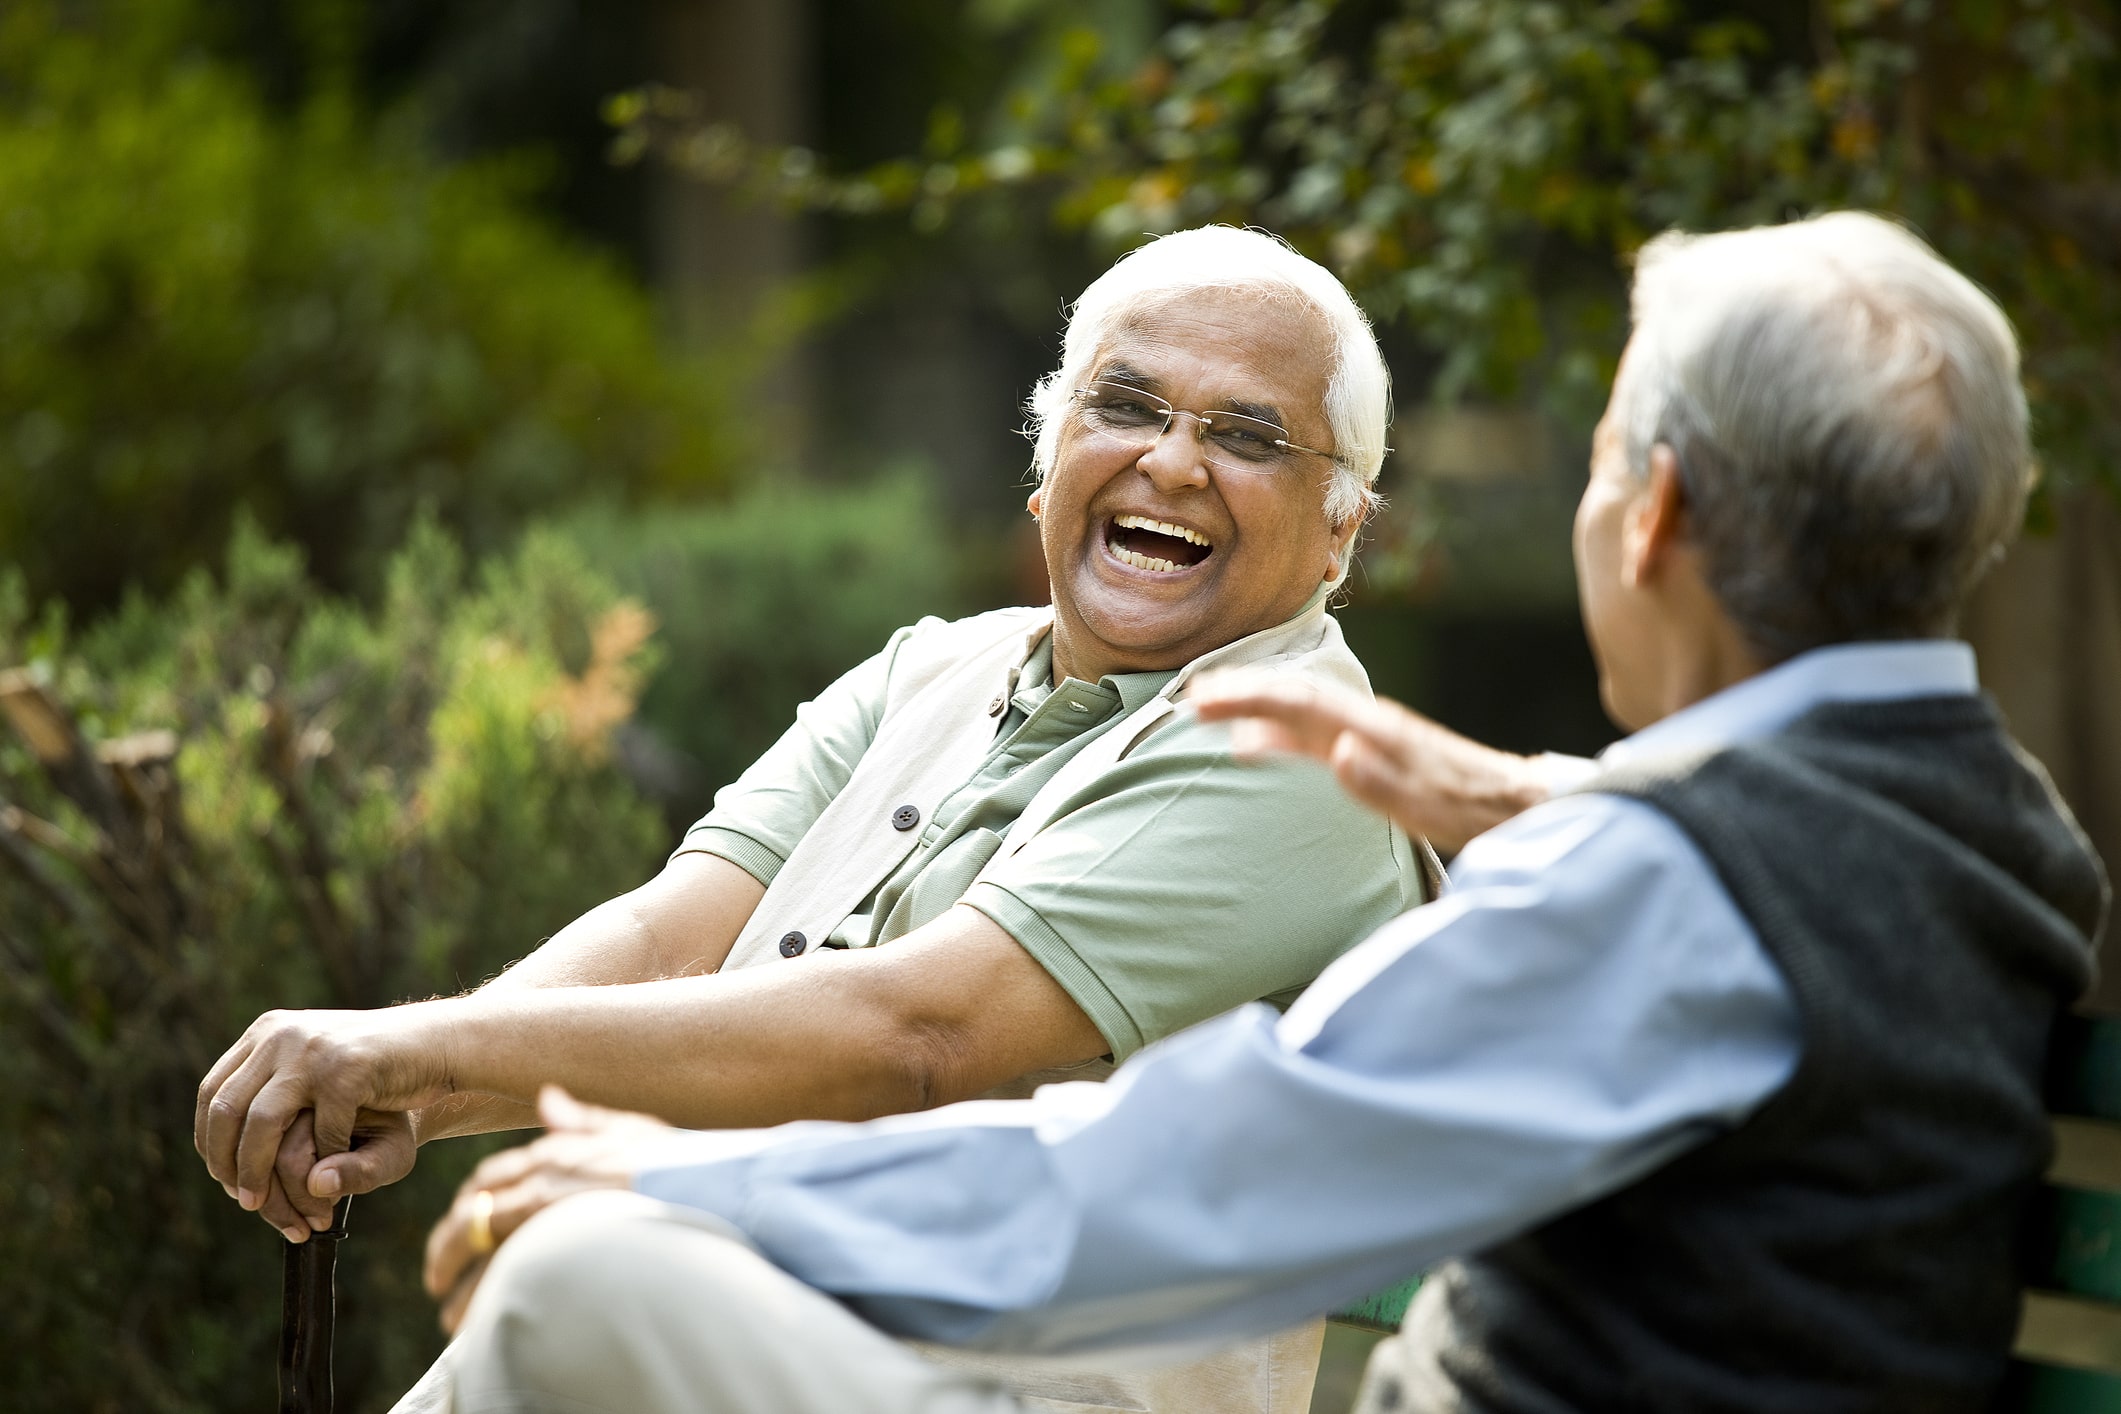 How To Find The Right Senior Citizen Health Insurance | Vital